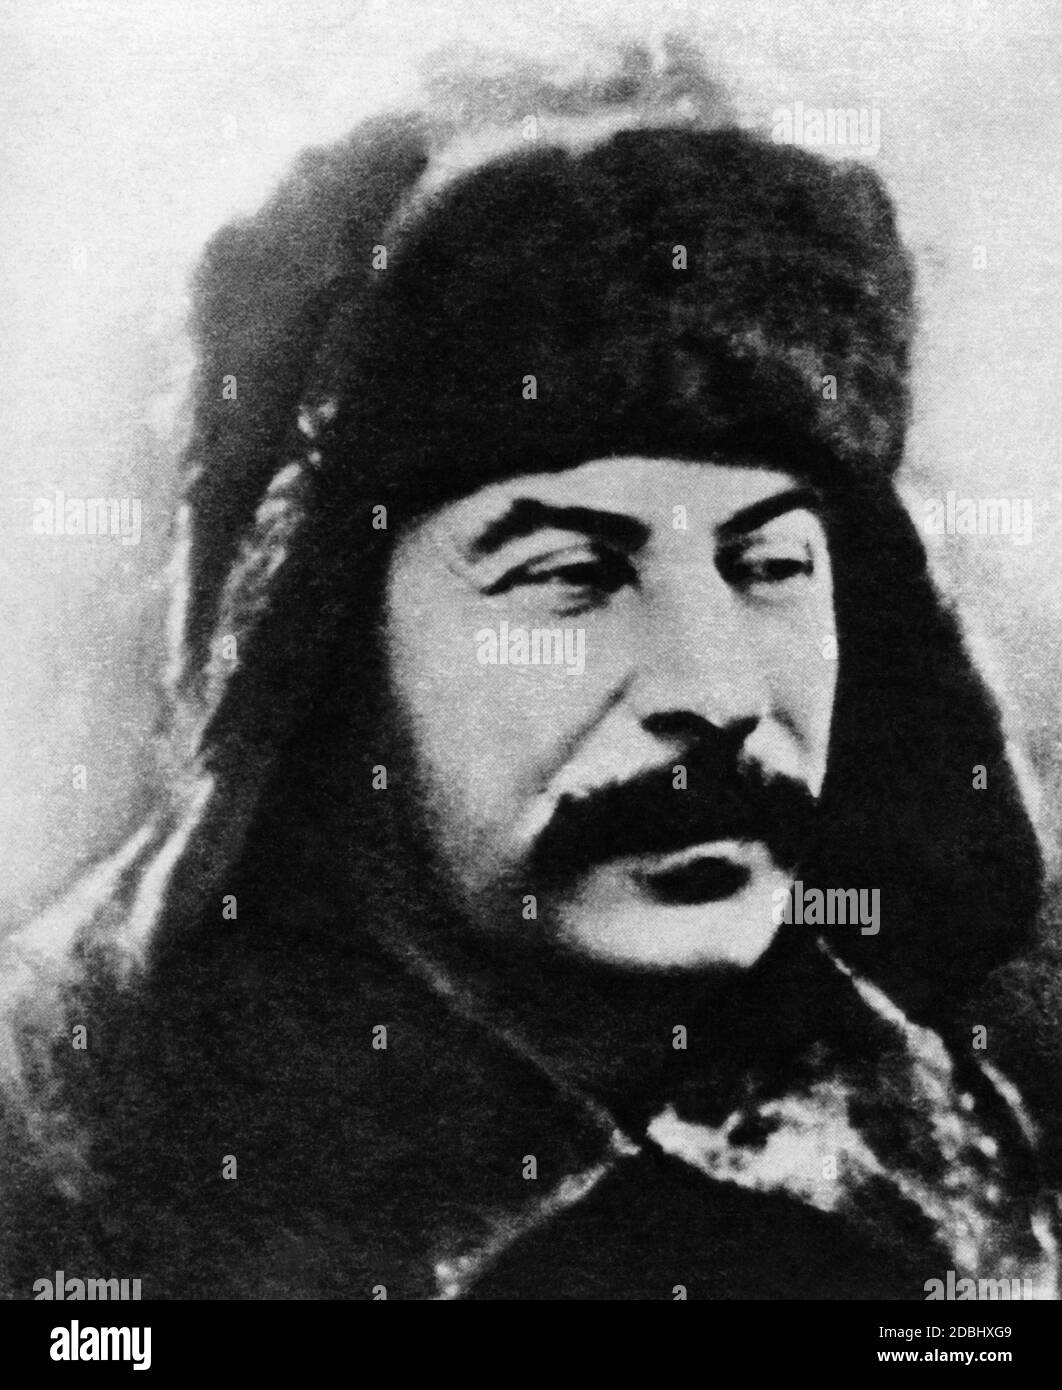 In 1928, after the removal of Trotsky, Bukharin and Rykov, Stalin was finally able to position himself within the CPSU as the sole ruler. Stock Photo